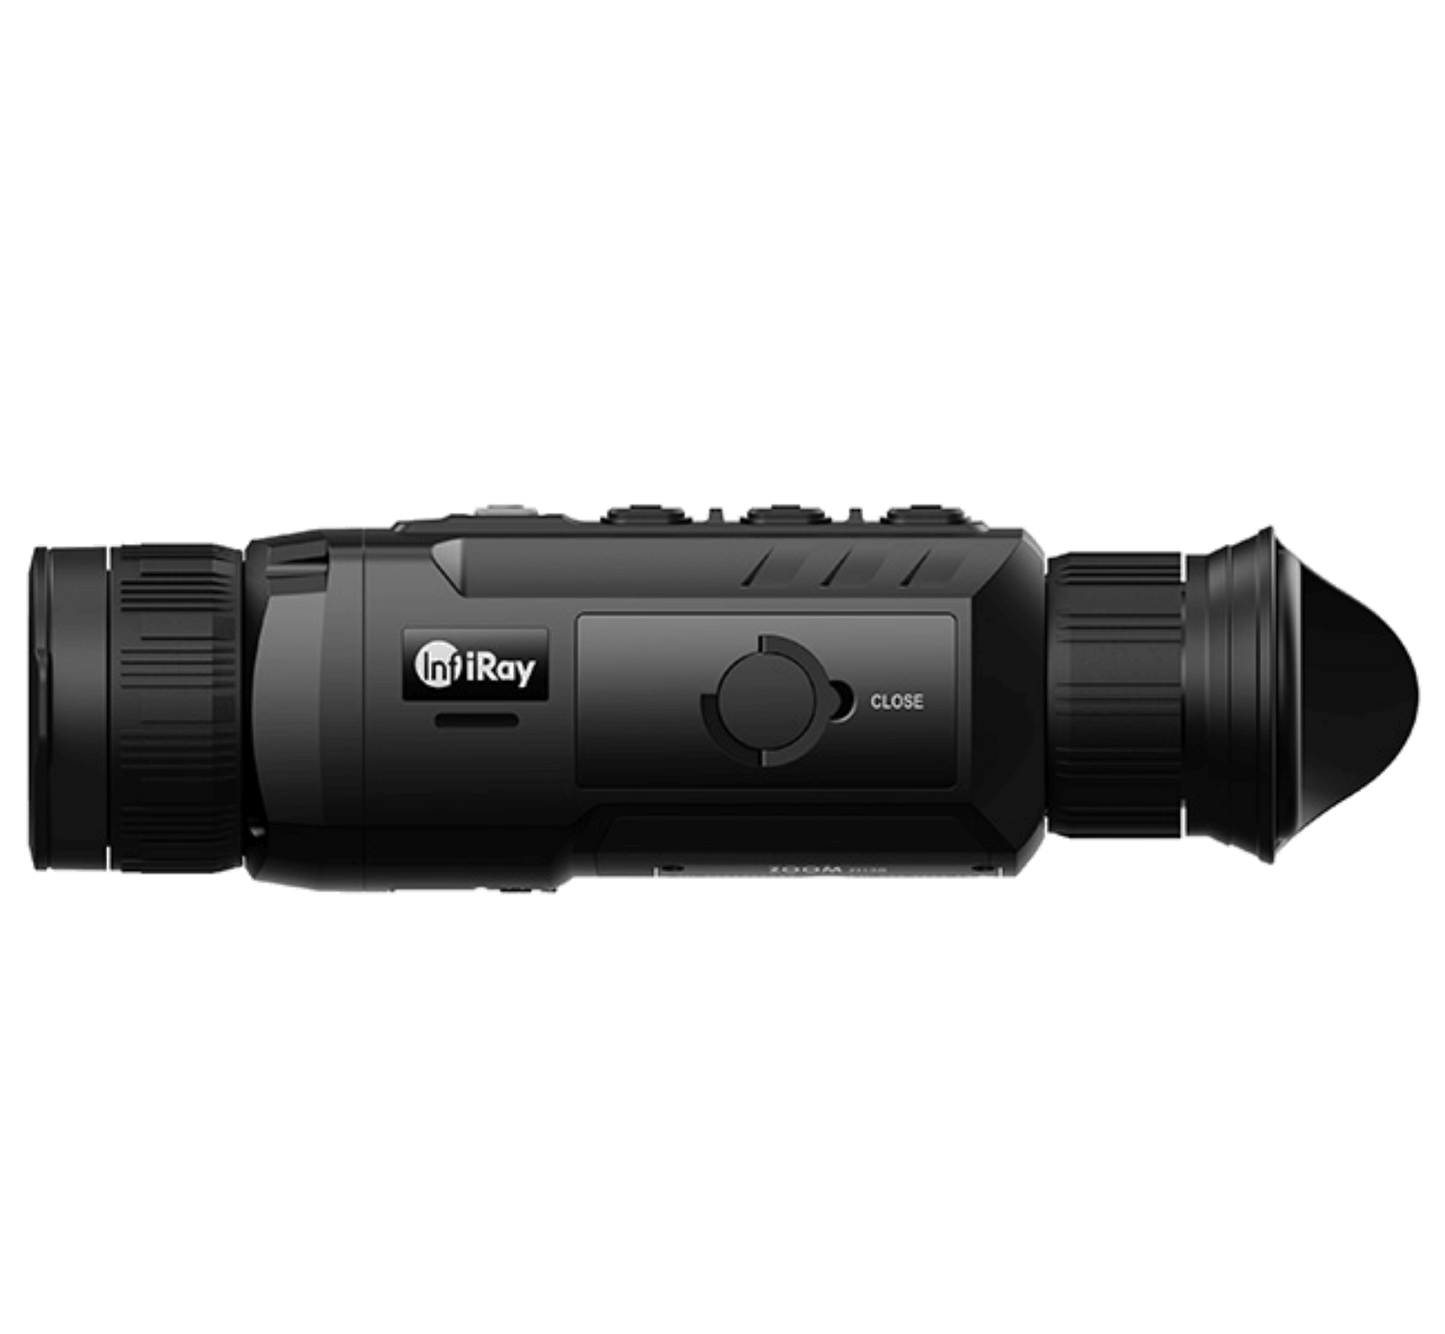 Cape Thermal - The best thermal imaging monoculars for sale - Infiray Zoom Series ZH38 Handheld thermal imaging monocular - Side View